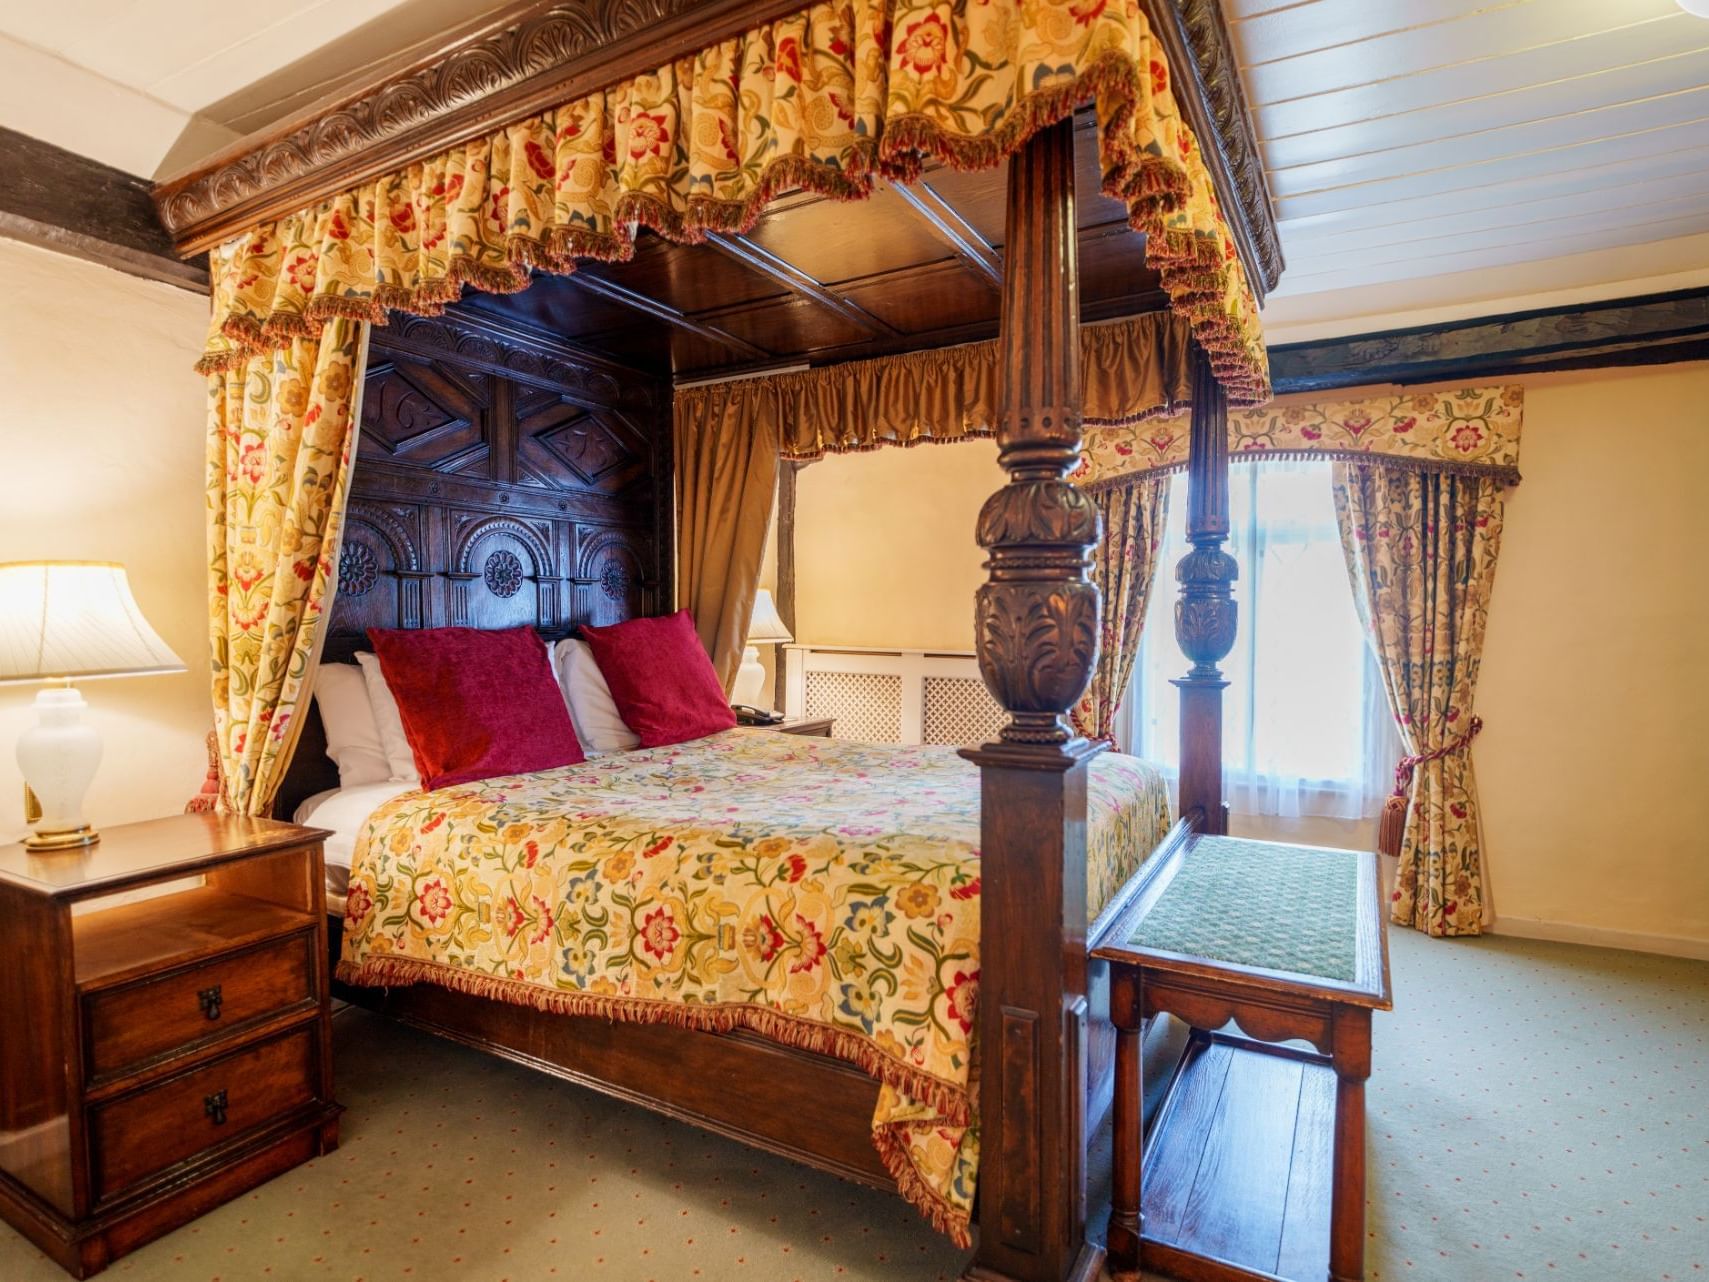 Tudor Suites & Rooms at Marygreen Manor in Brentwood